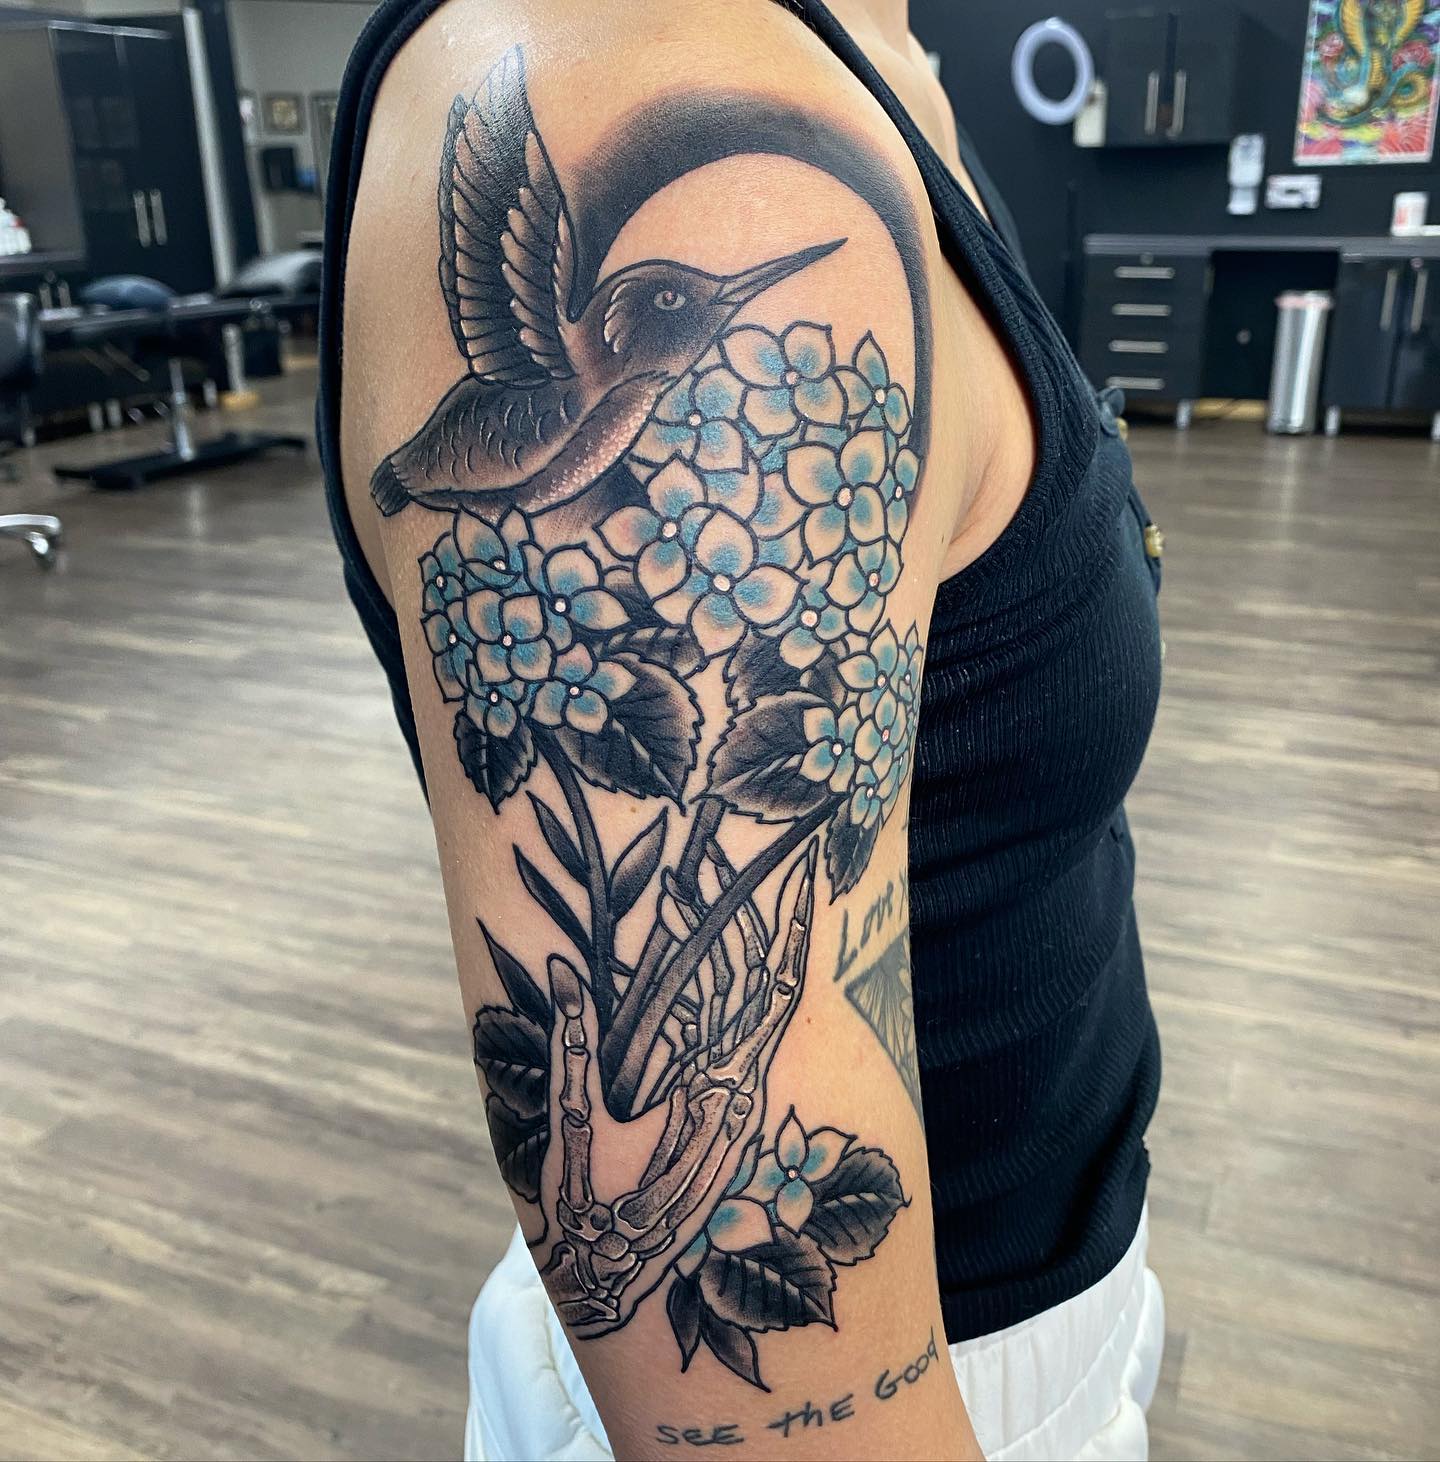 Owl and Snake done by Mariana Amaral at Lions Paw Tattoo, Everett WA : r/ tattoos